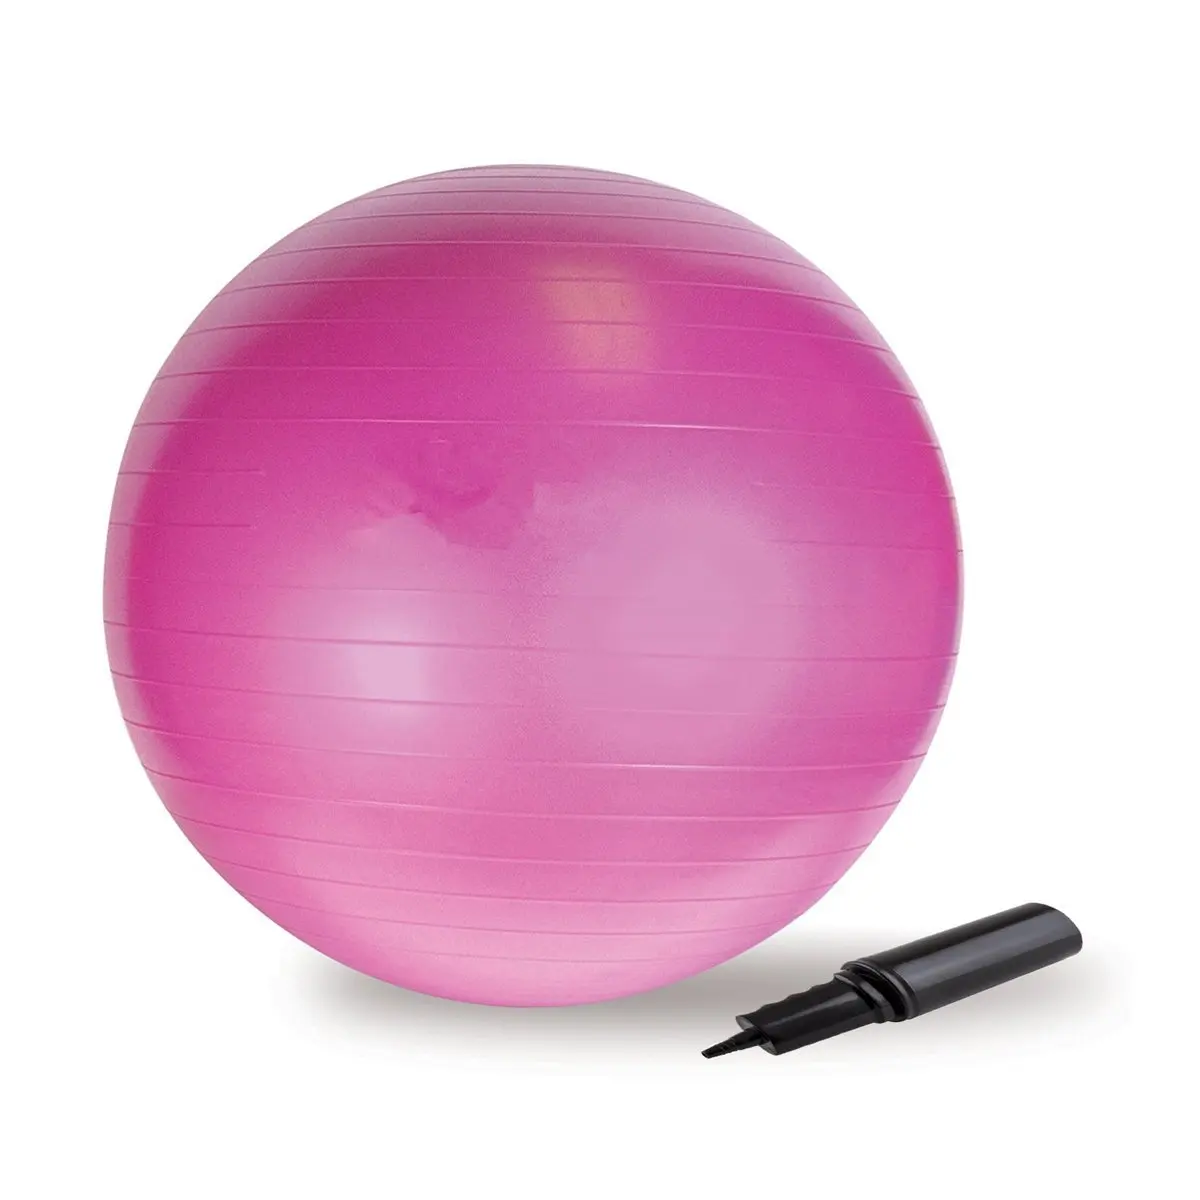 6 inch exercise ball